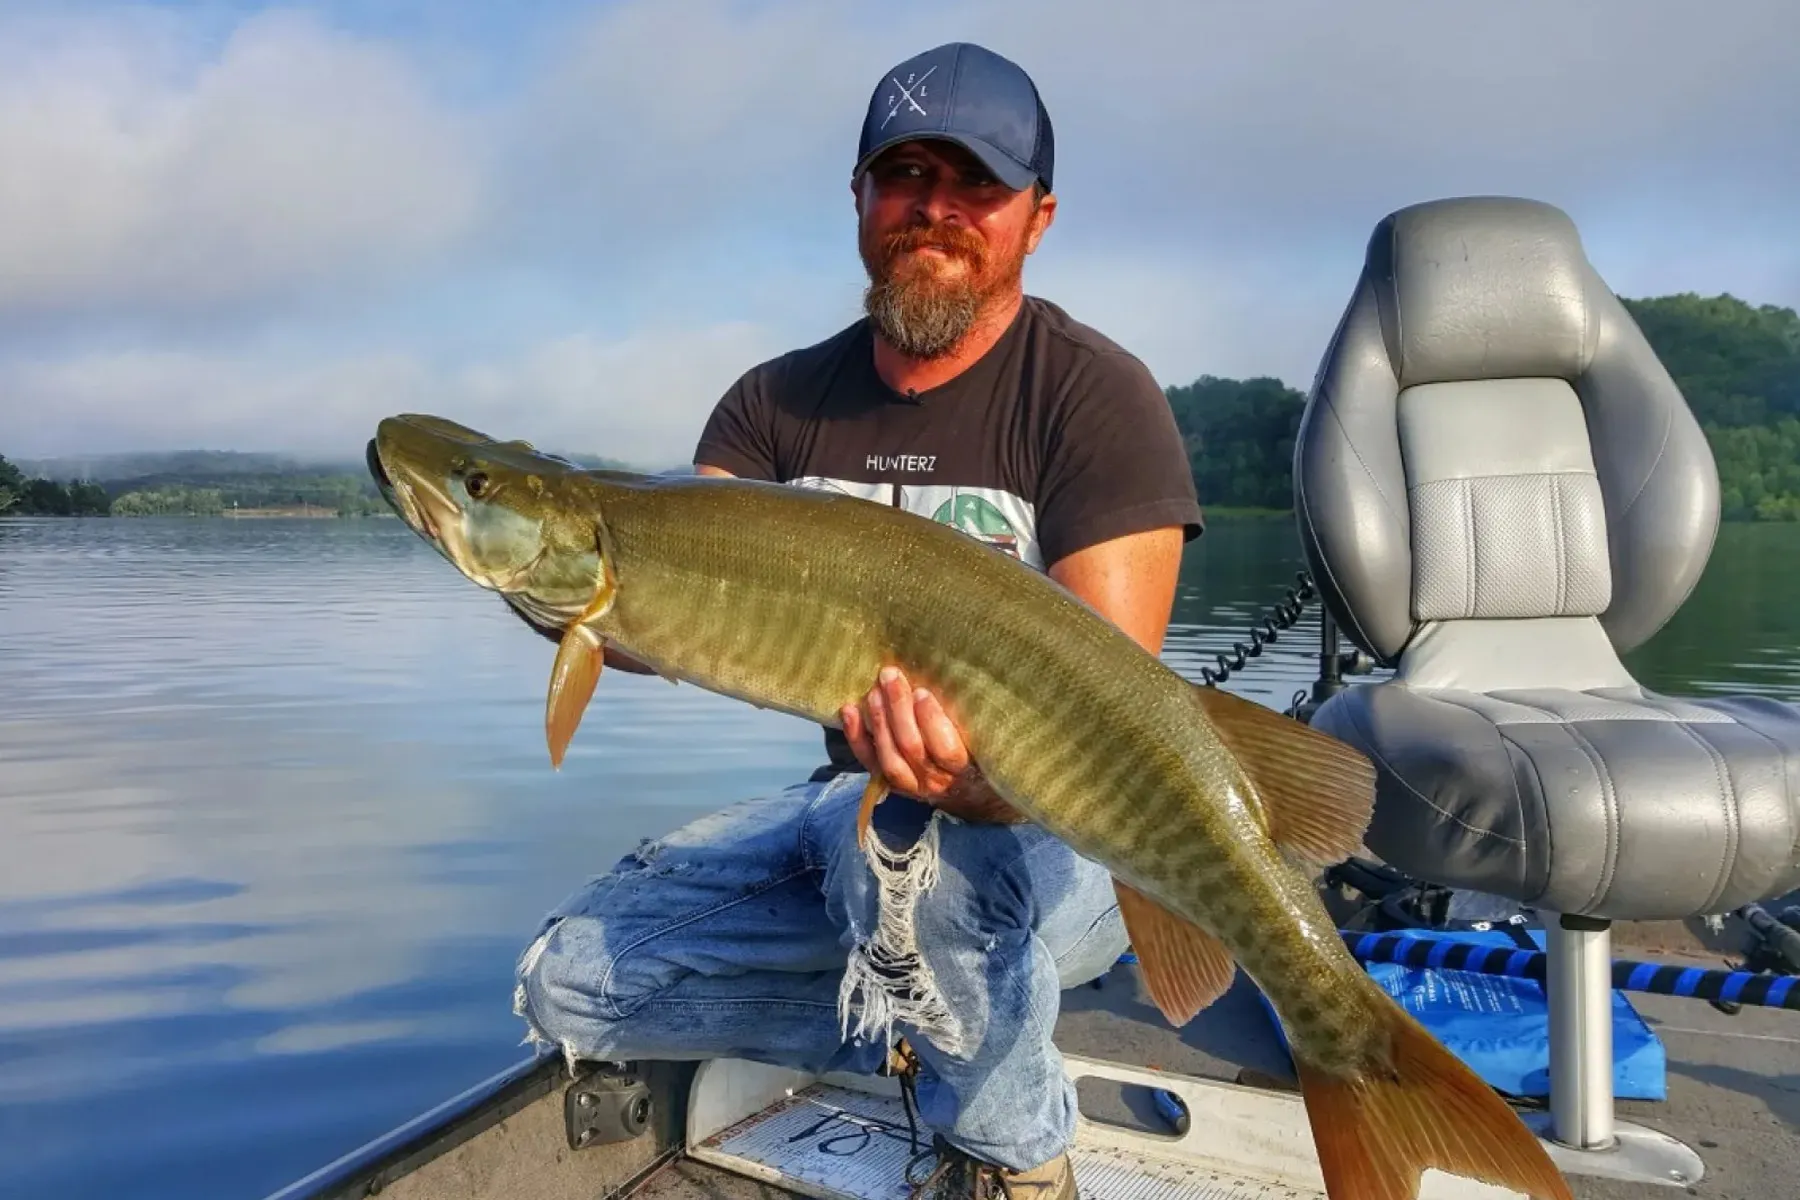 Tennessee musky fishing with Cory Allen holding a beautiful muskellunge